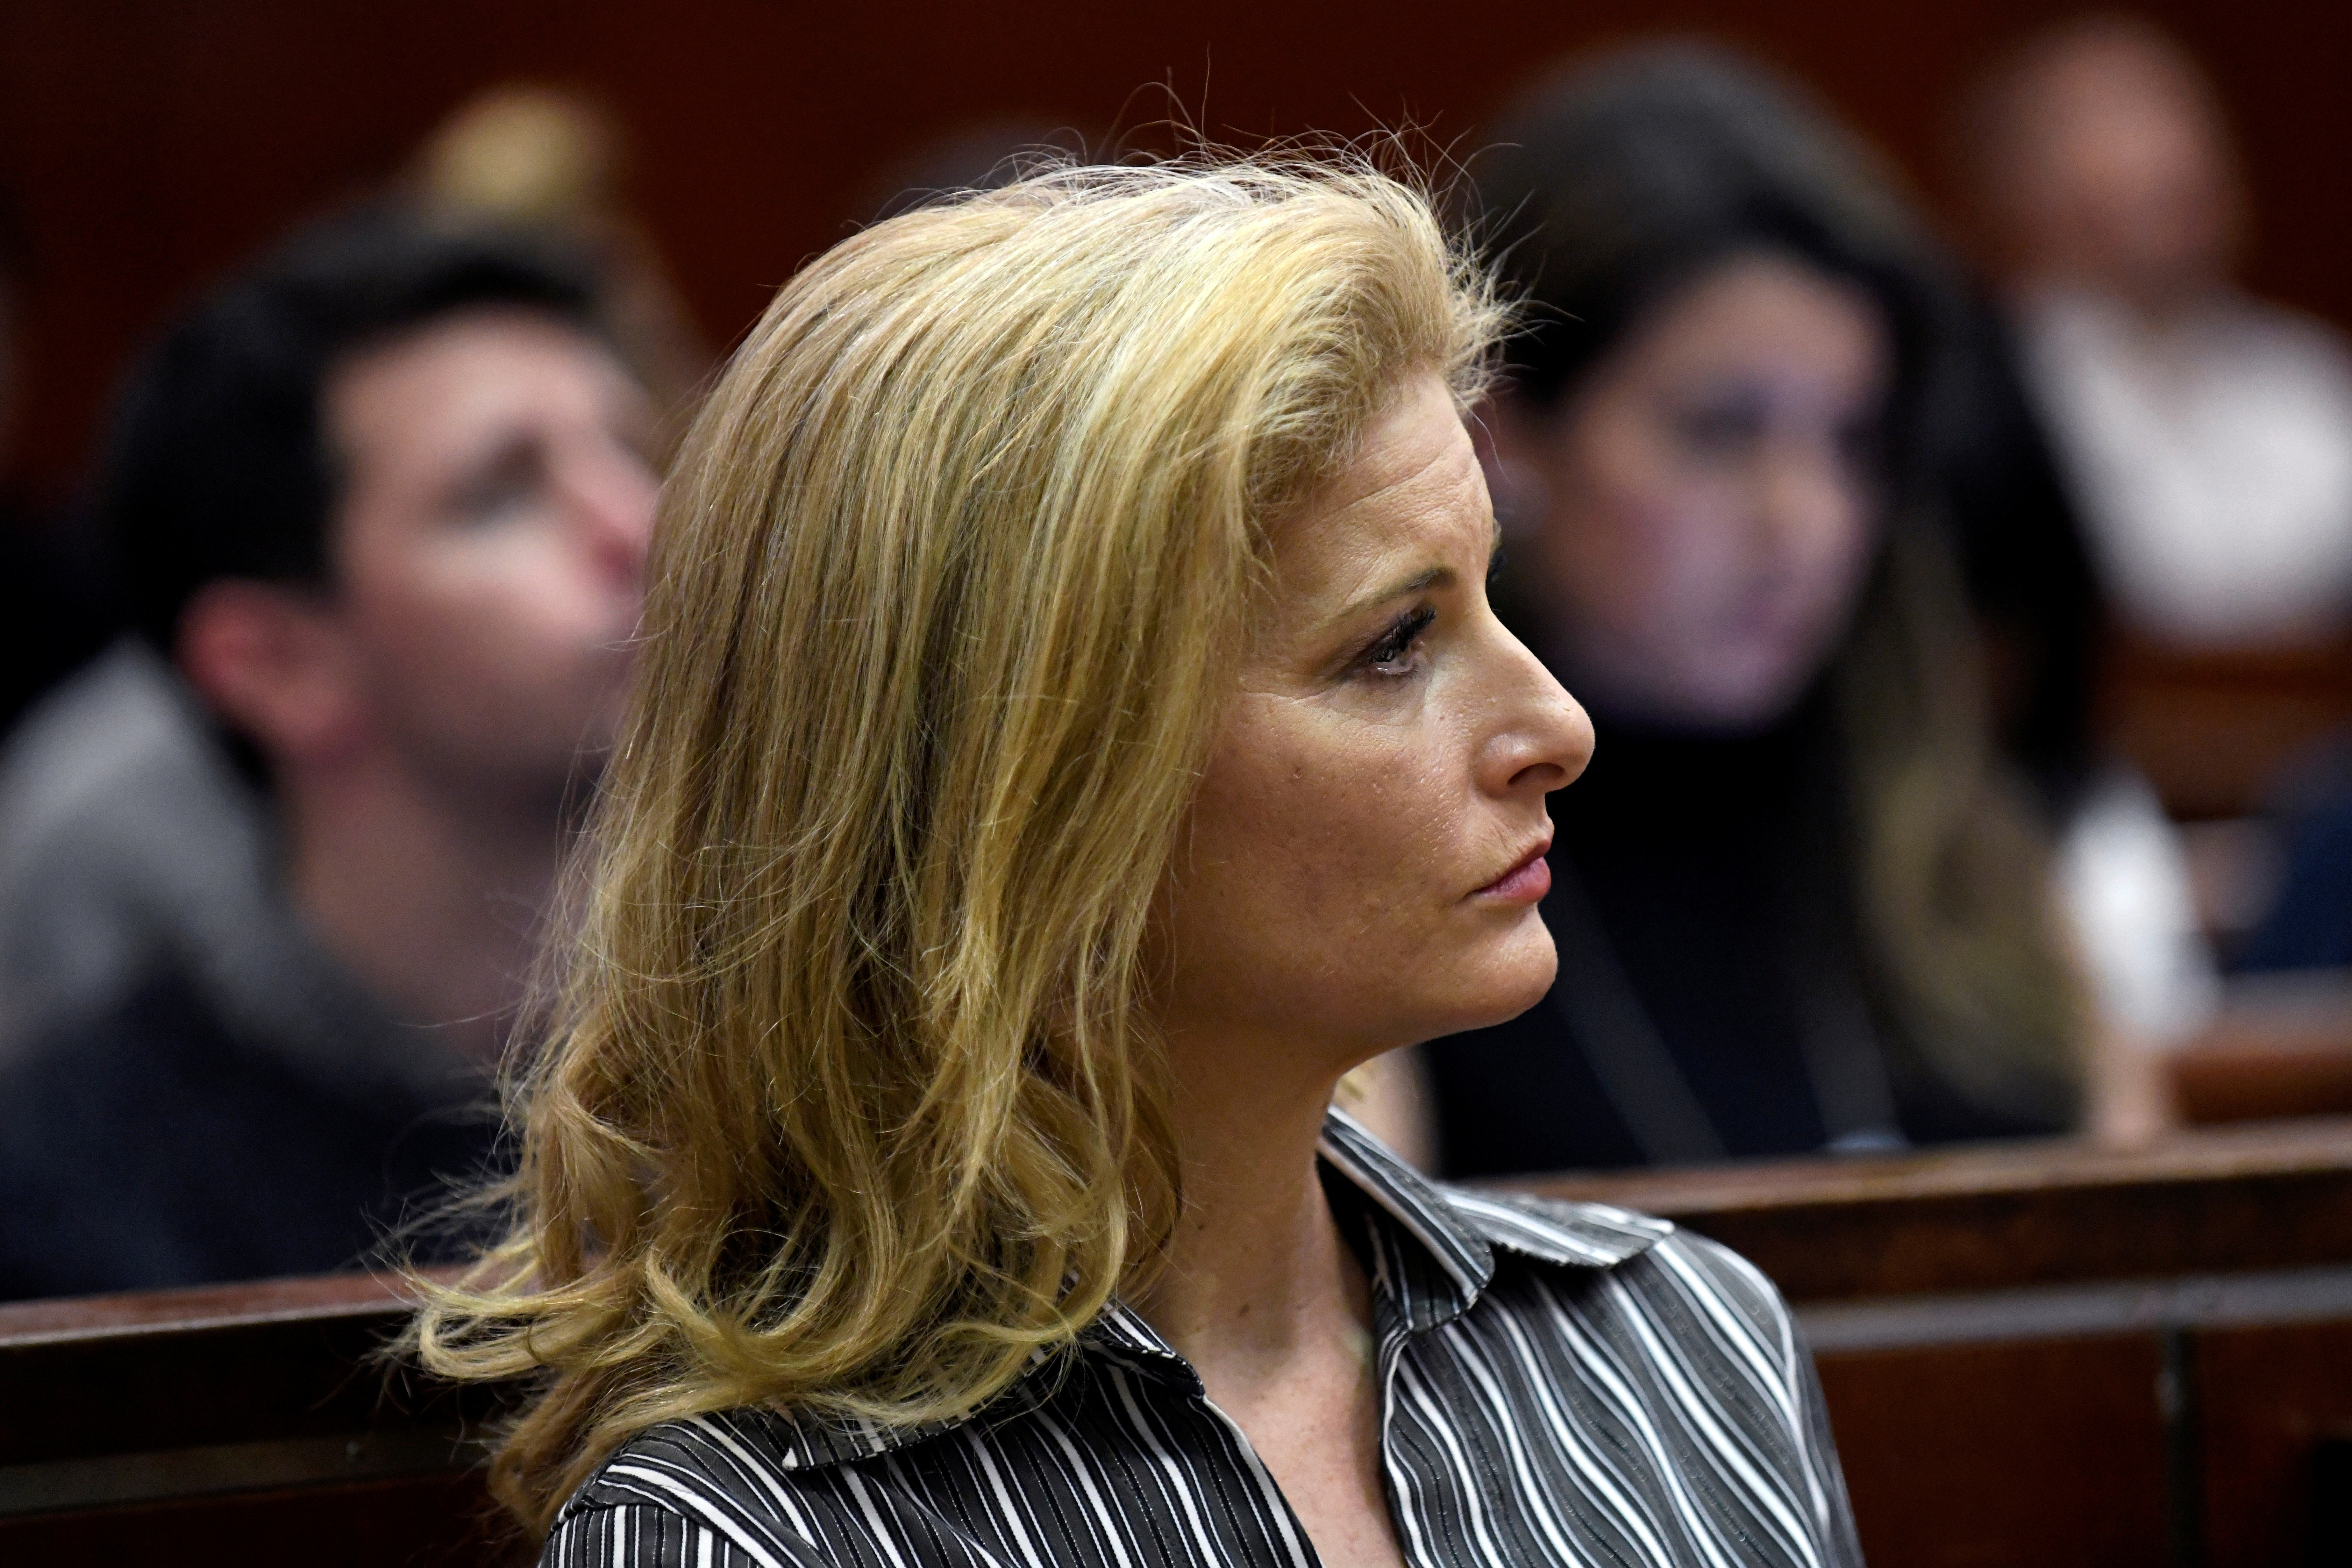 Summer Zervos, a former contestant on The Apprentice, appears in New York State Supreme Court during a hearing on a defamation case against U.S. President Donald Trump in Manhattan, New York.